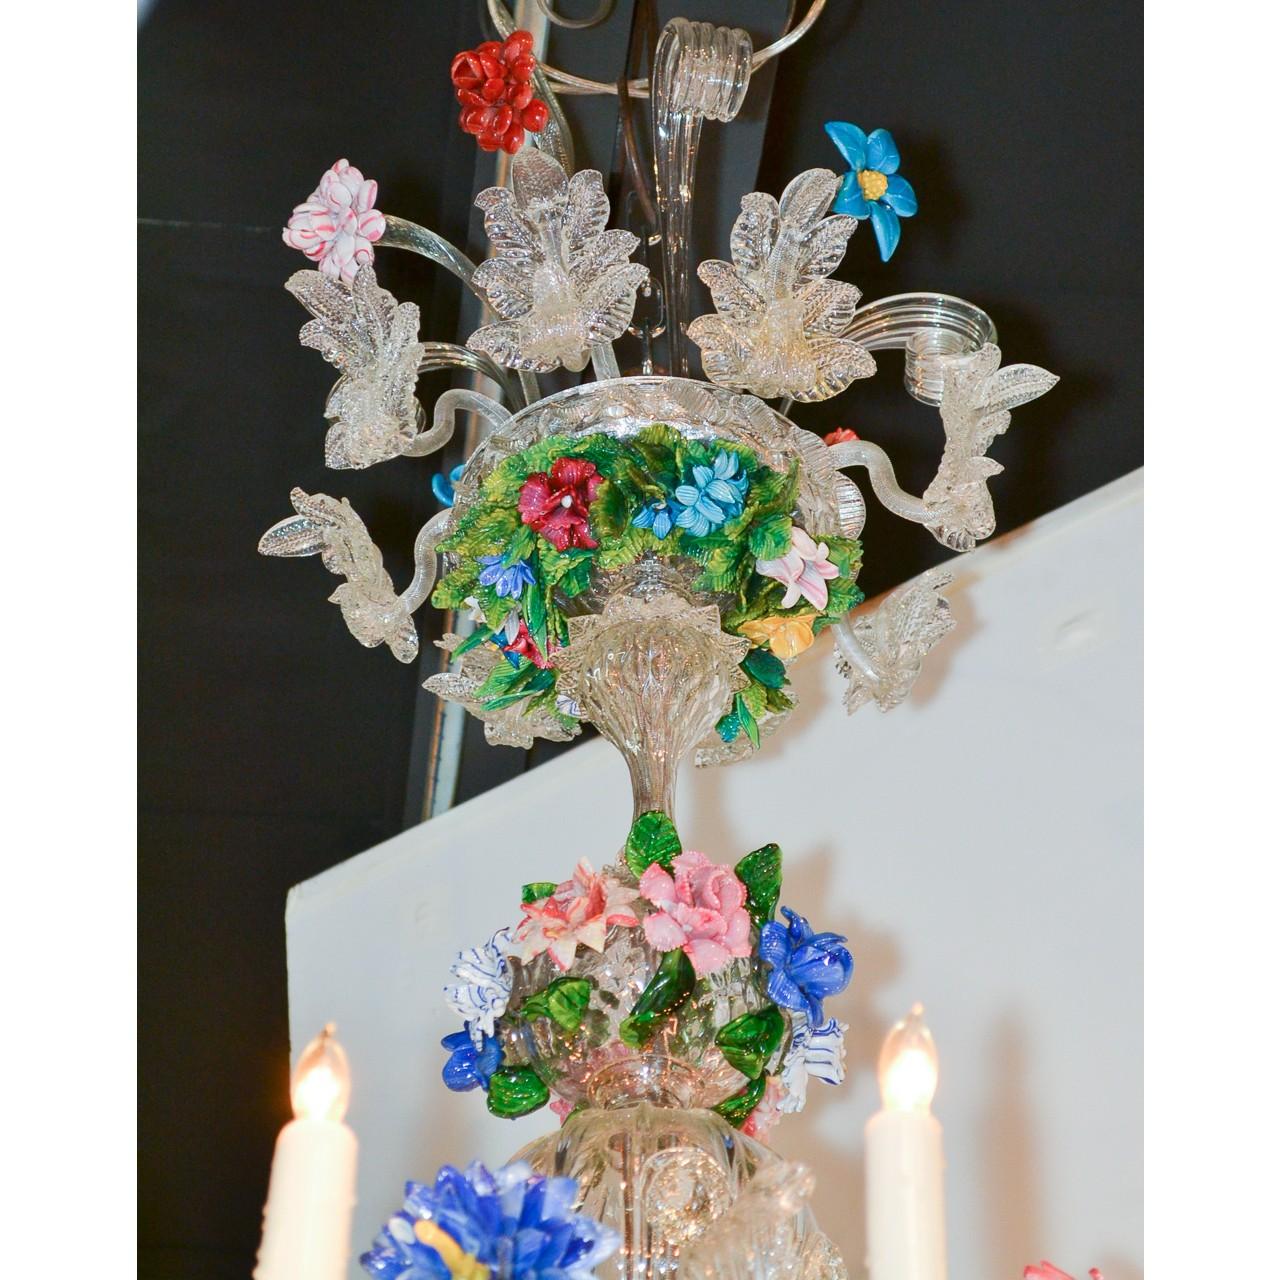 Magnificent early 20th century Venetian multi-color glass chandelier in hues of green, blue, lavender, red, and pink. The ornately designed crown with leaf scrolls and leaf sprays adorned with shoots of colorful wildflowers. The shaped stem banded